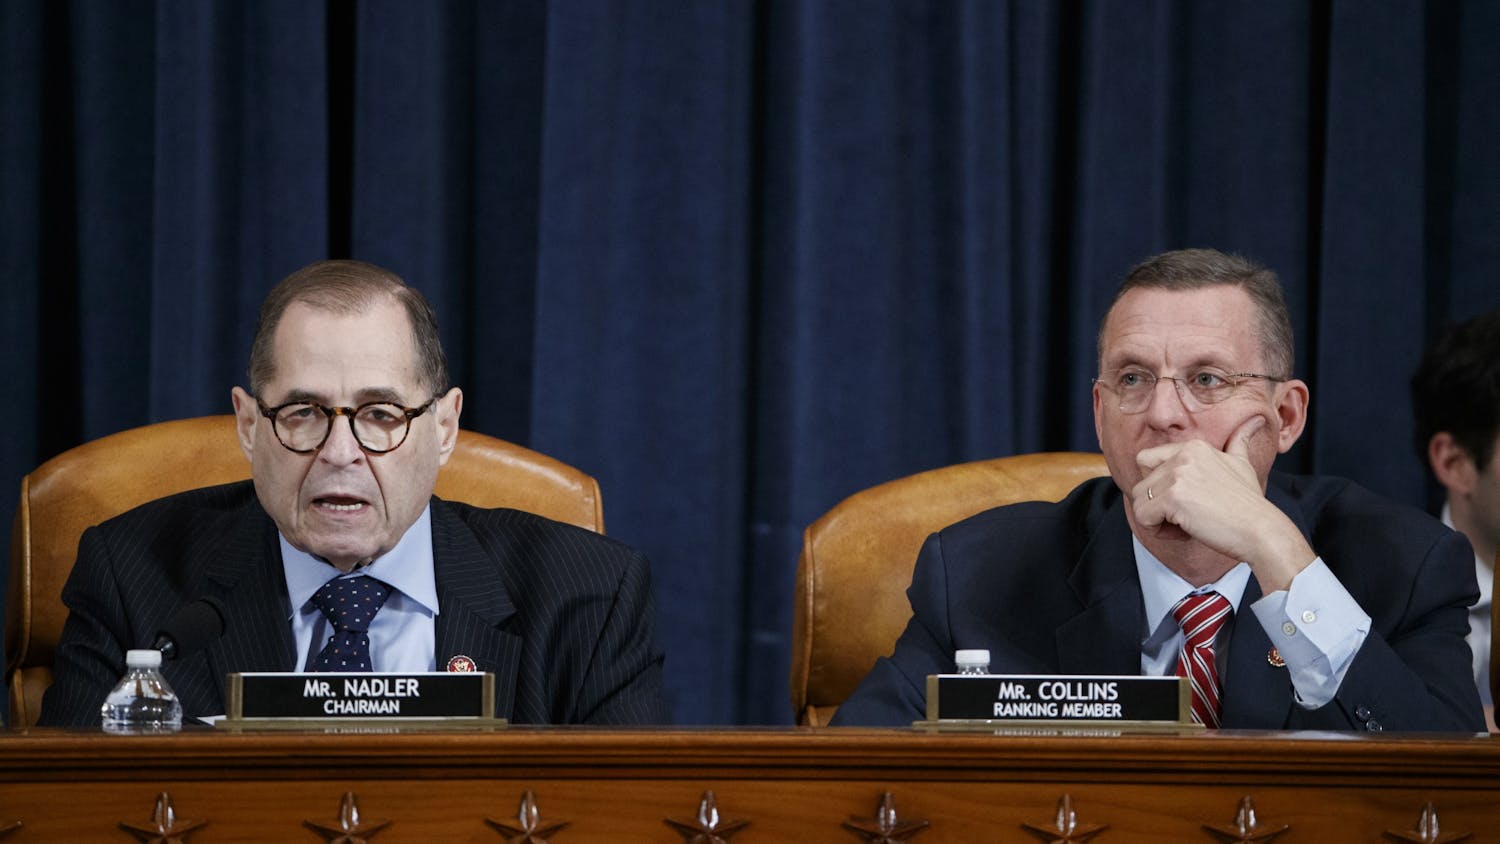 U.S. House Judiciary Committee Chairman Jerry Nadler, D-NY,  with ranking member Doug Collins, R-GA, delivers opening remarks during the committee&#x27;s markup of the articles of impeachment against President Donald Trump on Dec. 11 at Capitol Hill in Washington, D.C.